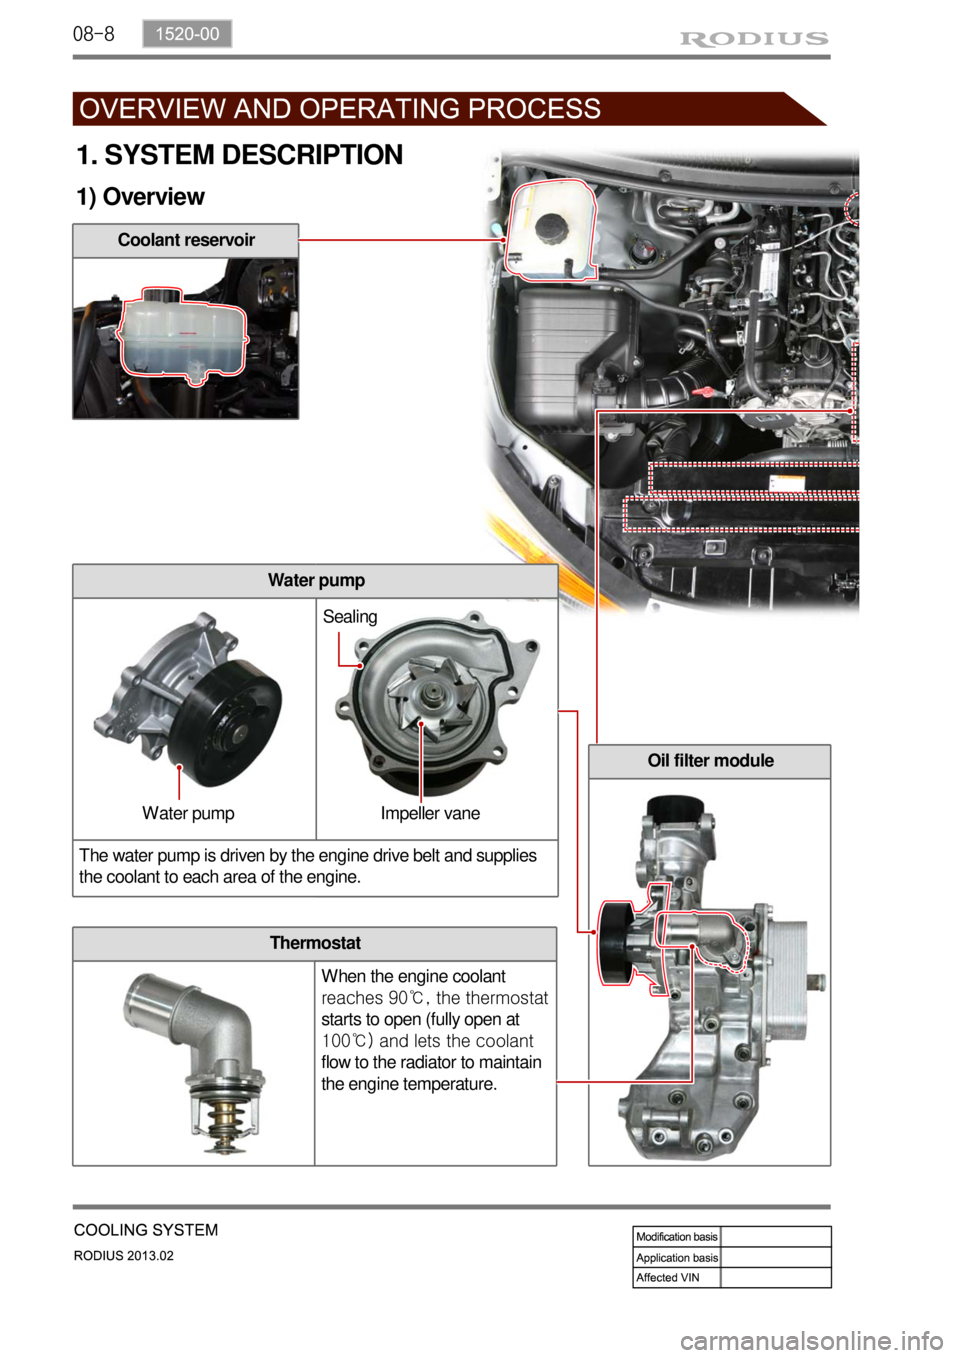 SSANGYONG TURISMO 2013  Service Manual 08-8
Coolant reservoir
Oil filter module
Thermostat
When the engine coolant 
reaches 90℃, the thermostat 
starts to open (fully open at 
100℃) and lets the coolant 
flow to the radiator to maintai